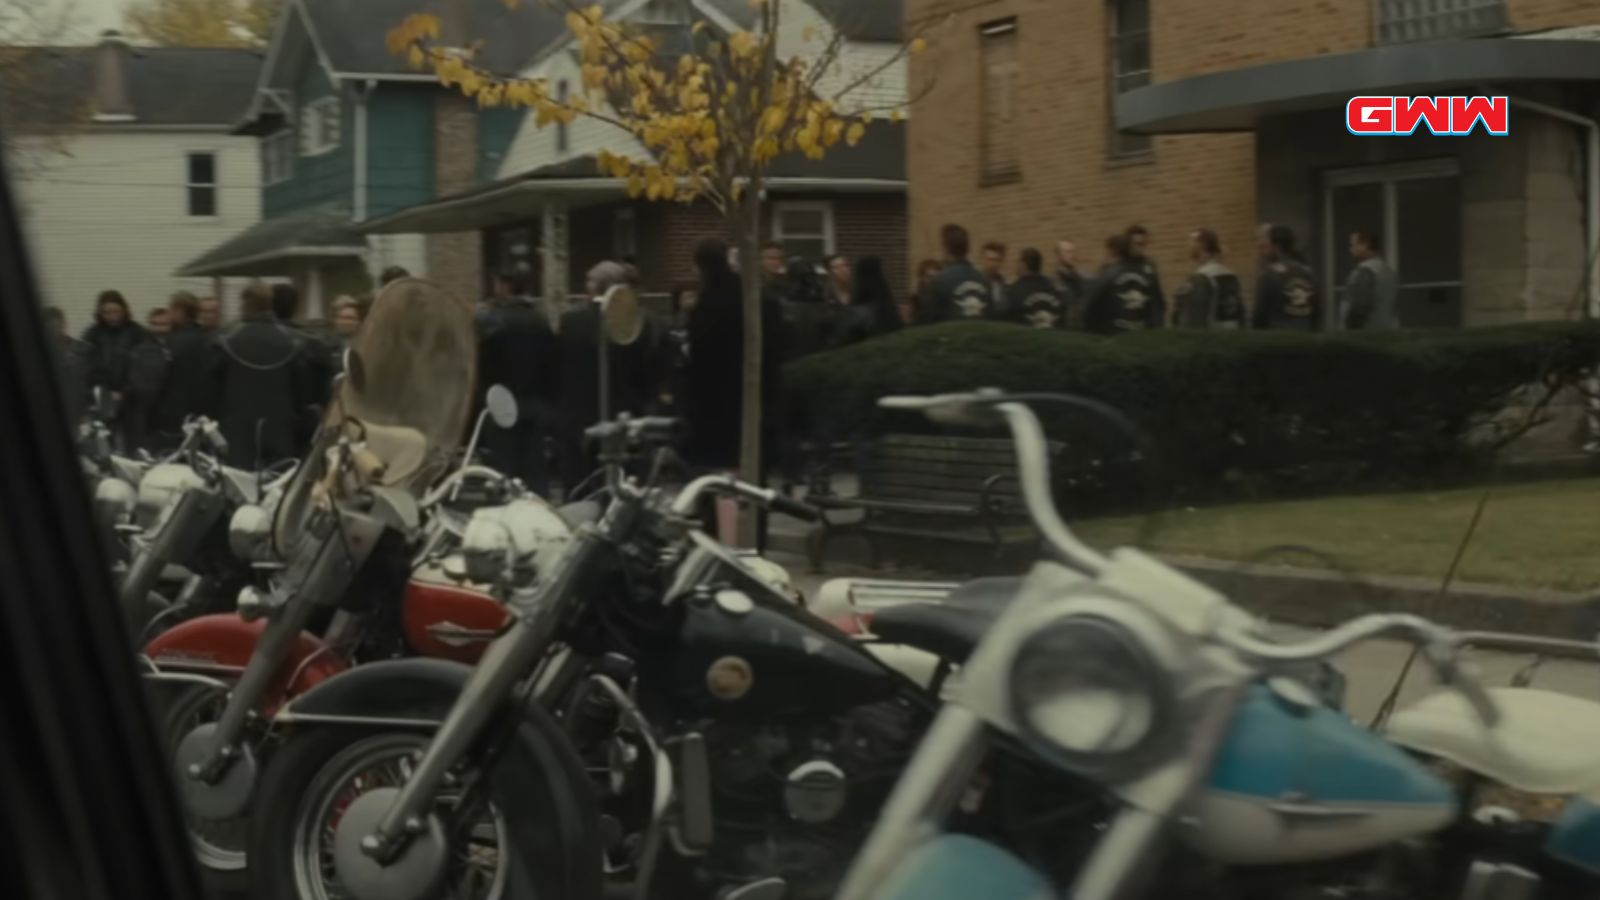 Group of motorcyclists gathering outside a house, several bikes parked.